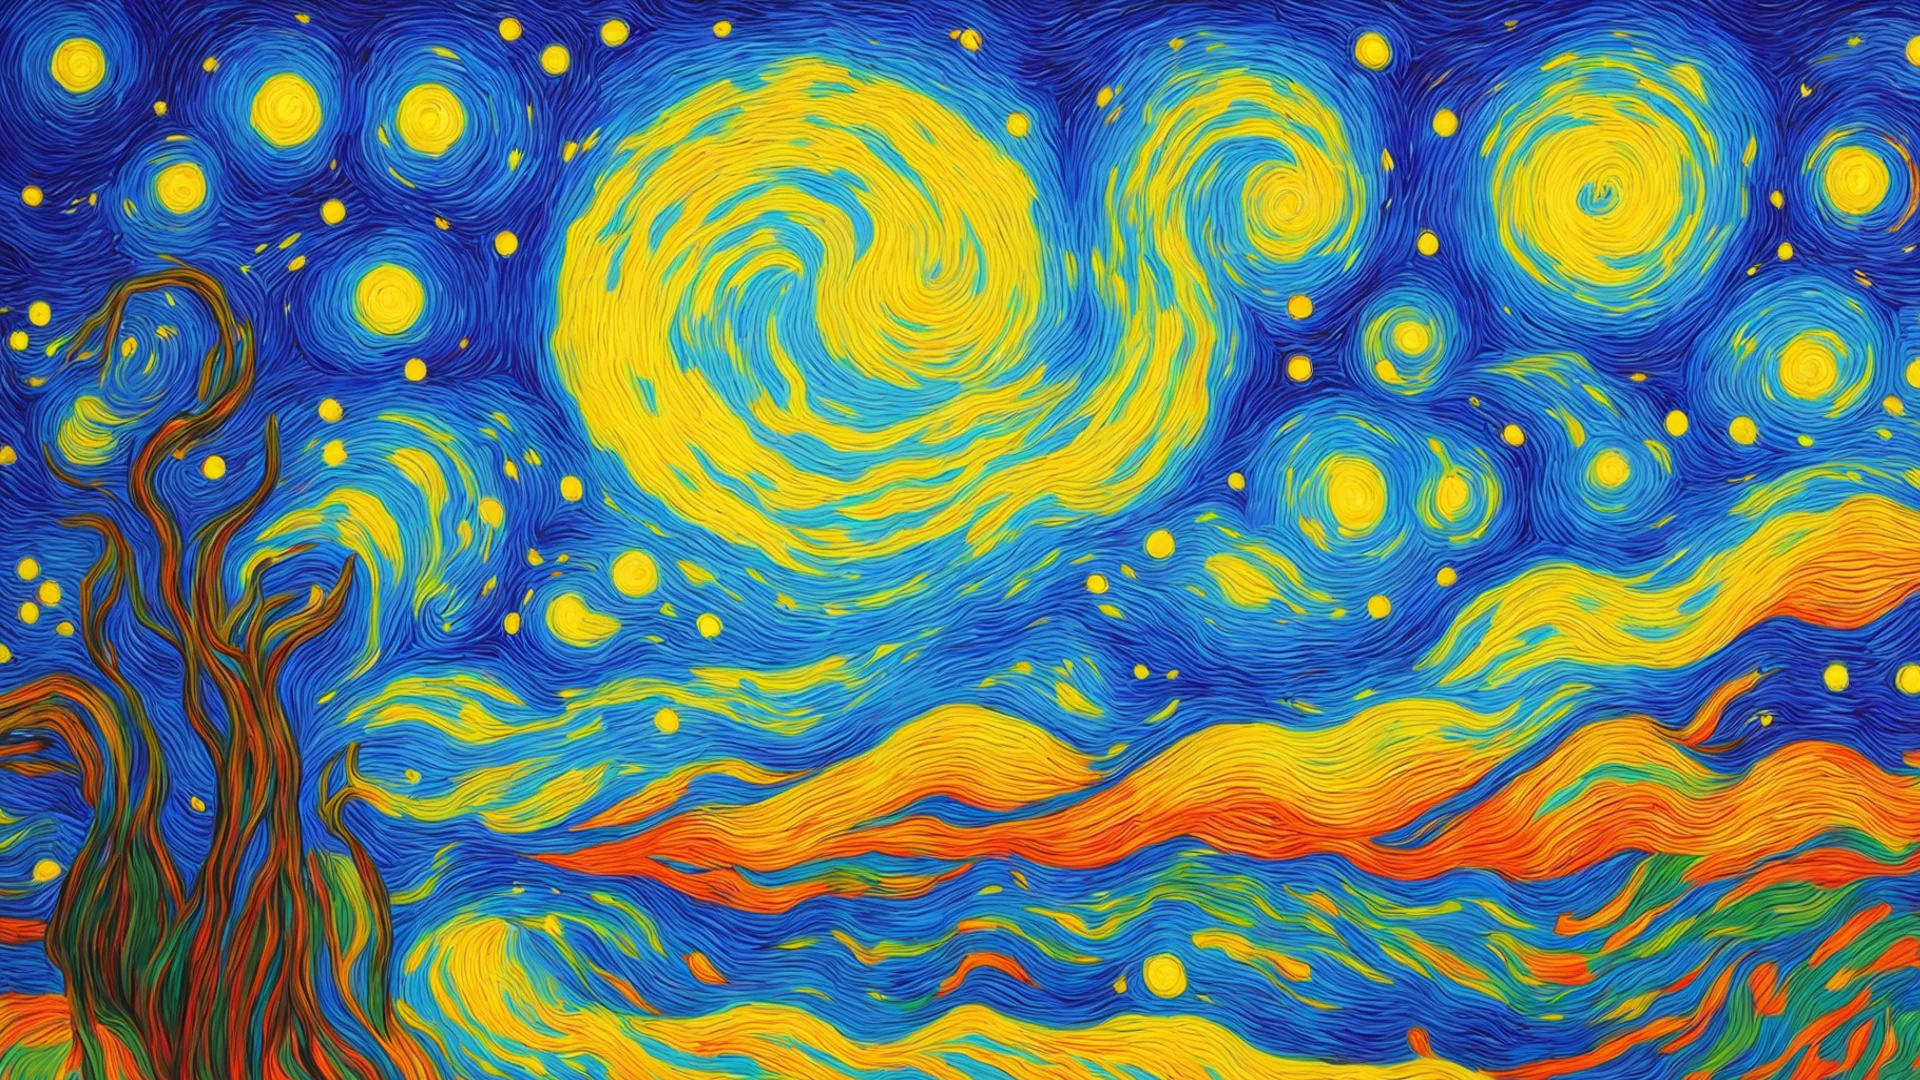 amazing starry night van gogh interesting colors awesome portrait 2 wide